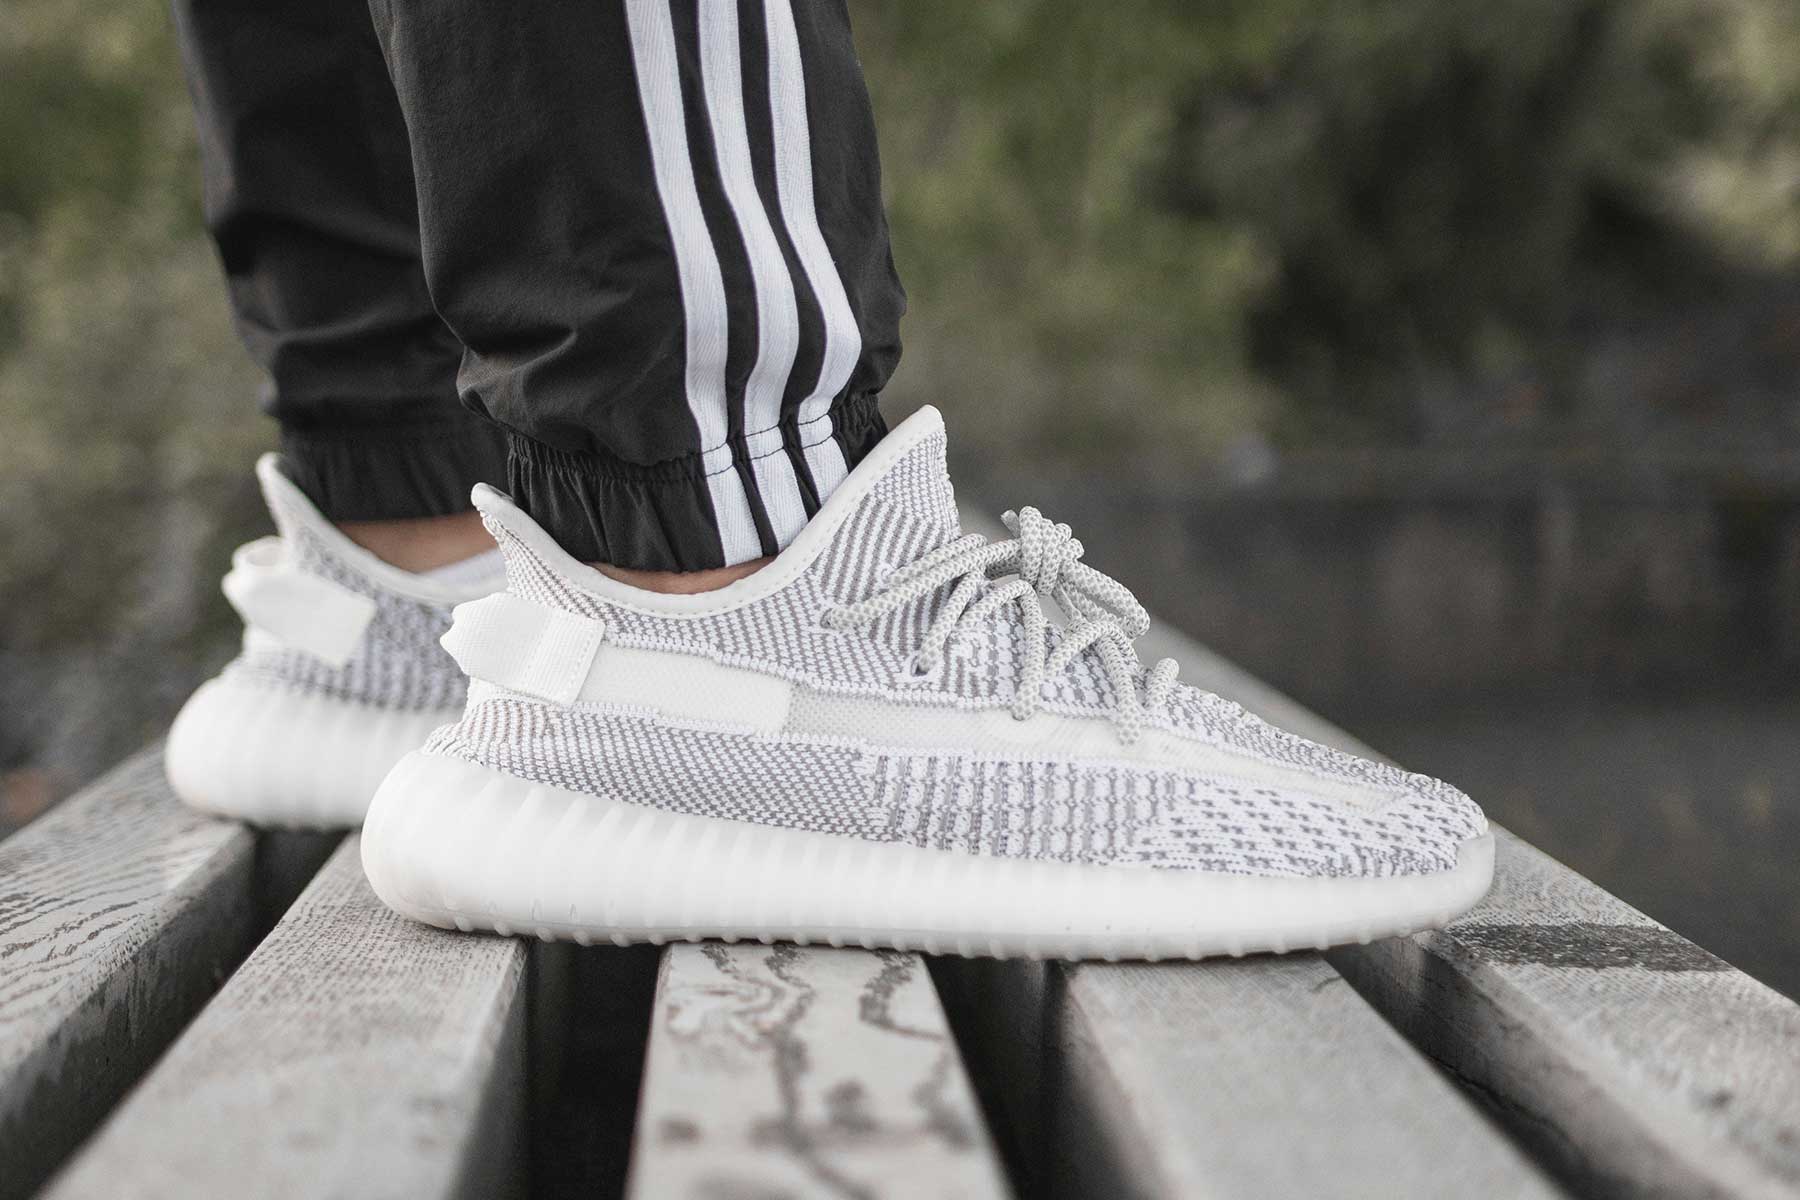 Prestige Tyr interval adidas Might Drop Its YEEZY-Free 350 & 500 Sneakers in 2023